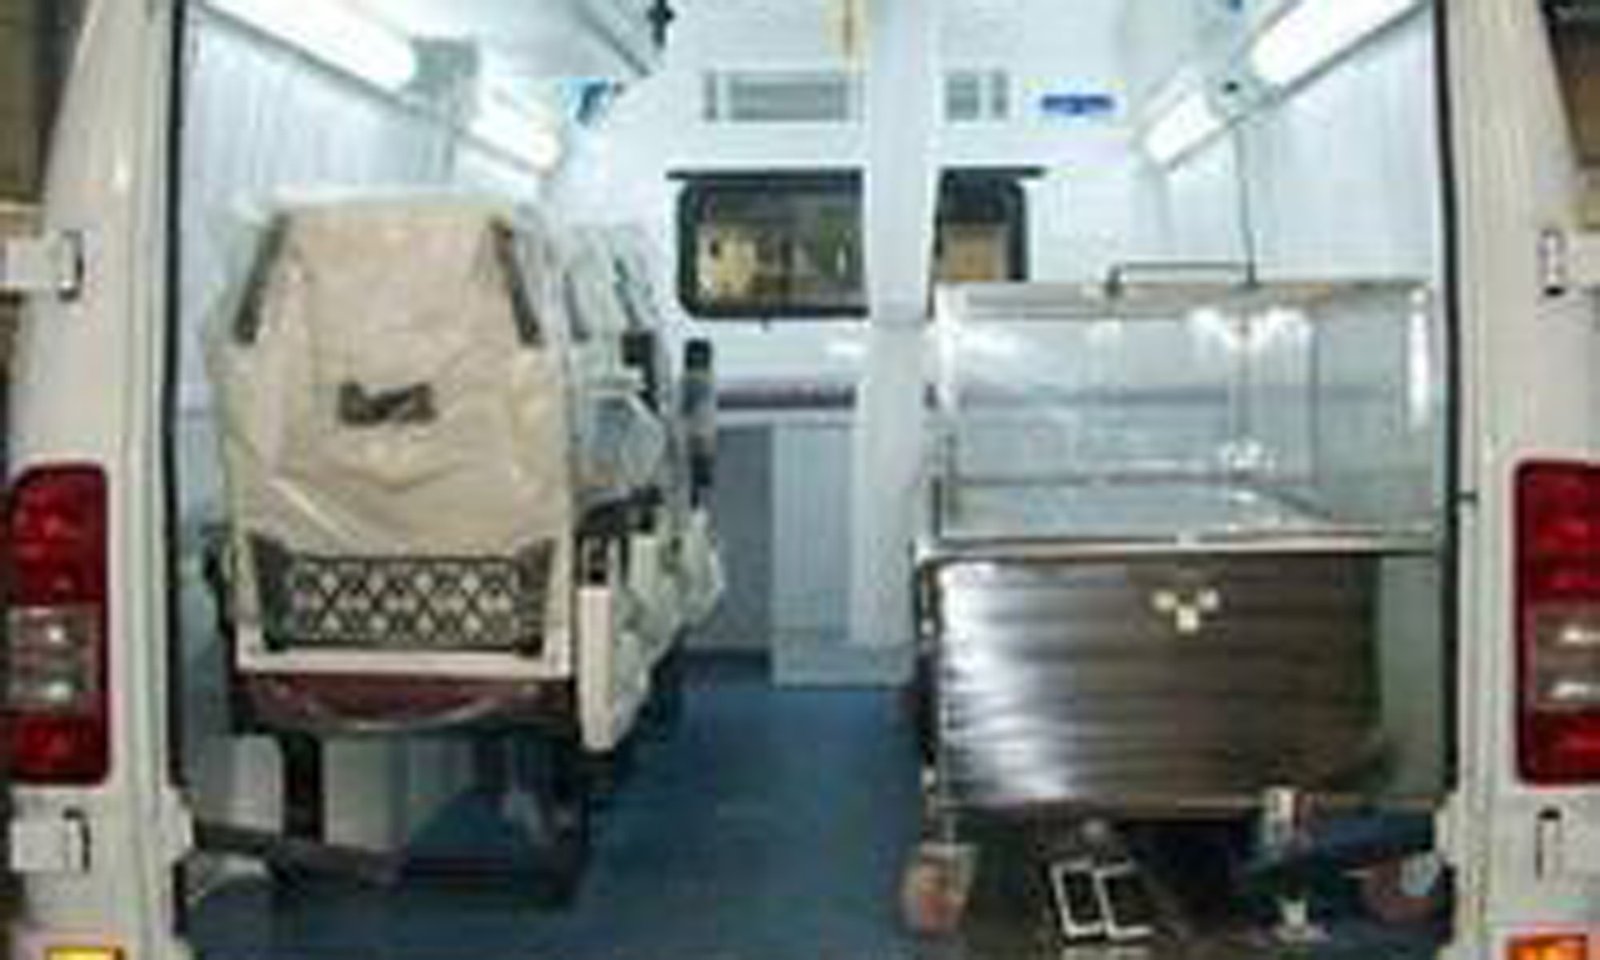 Ambulance with in-built Freezer Box